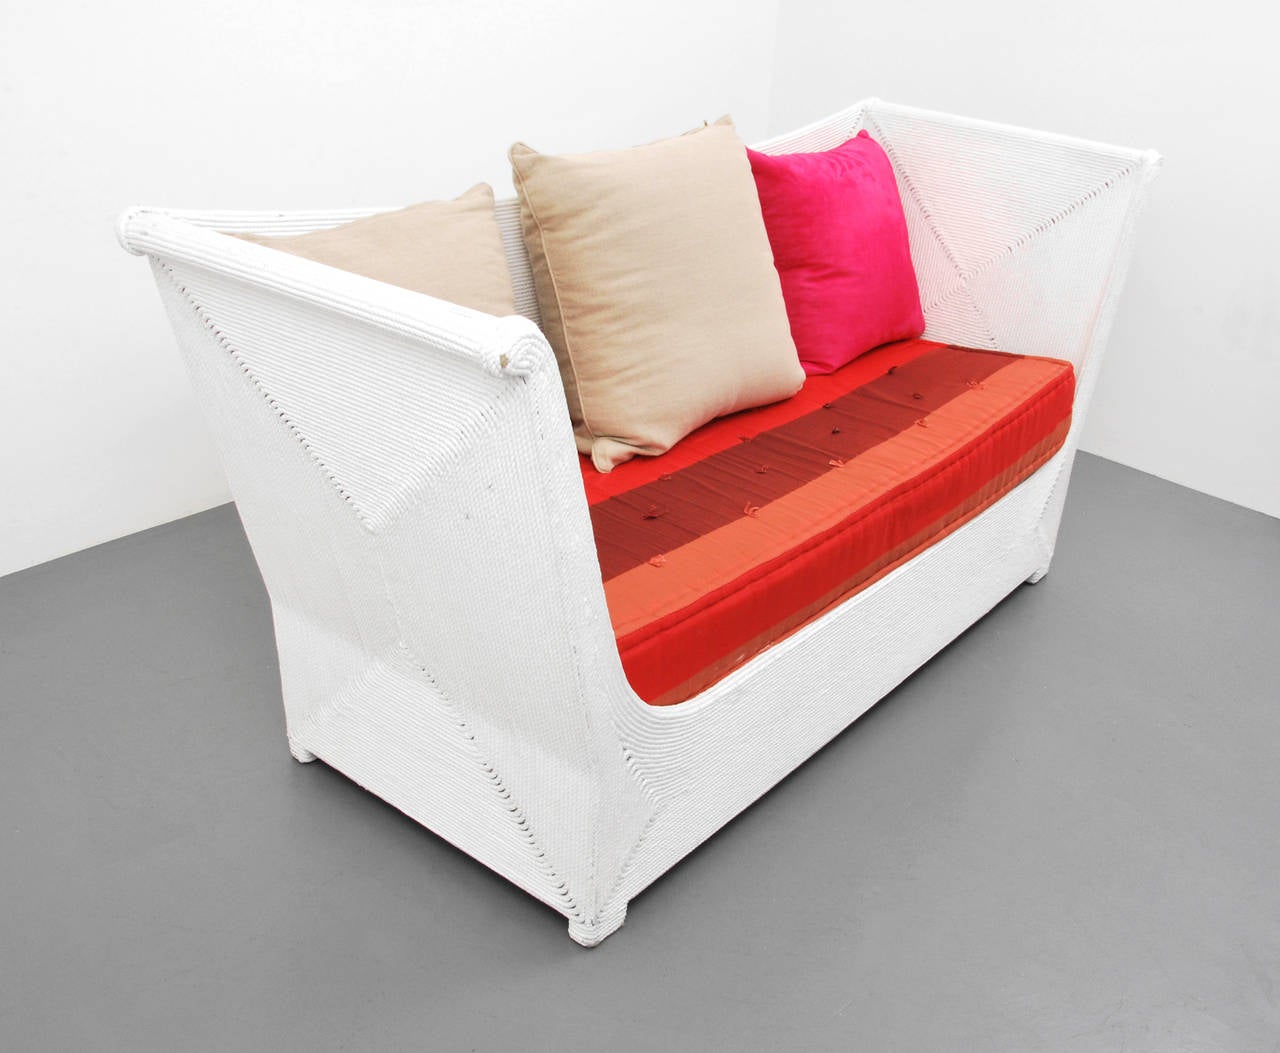 Daybed/sofa made of wrapped and painted rope over wood by Christian Astuguevieille. 